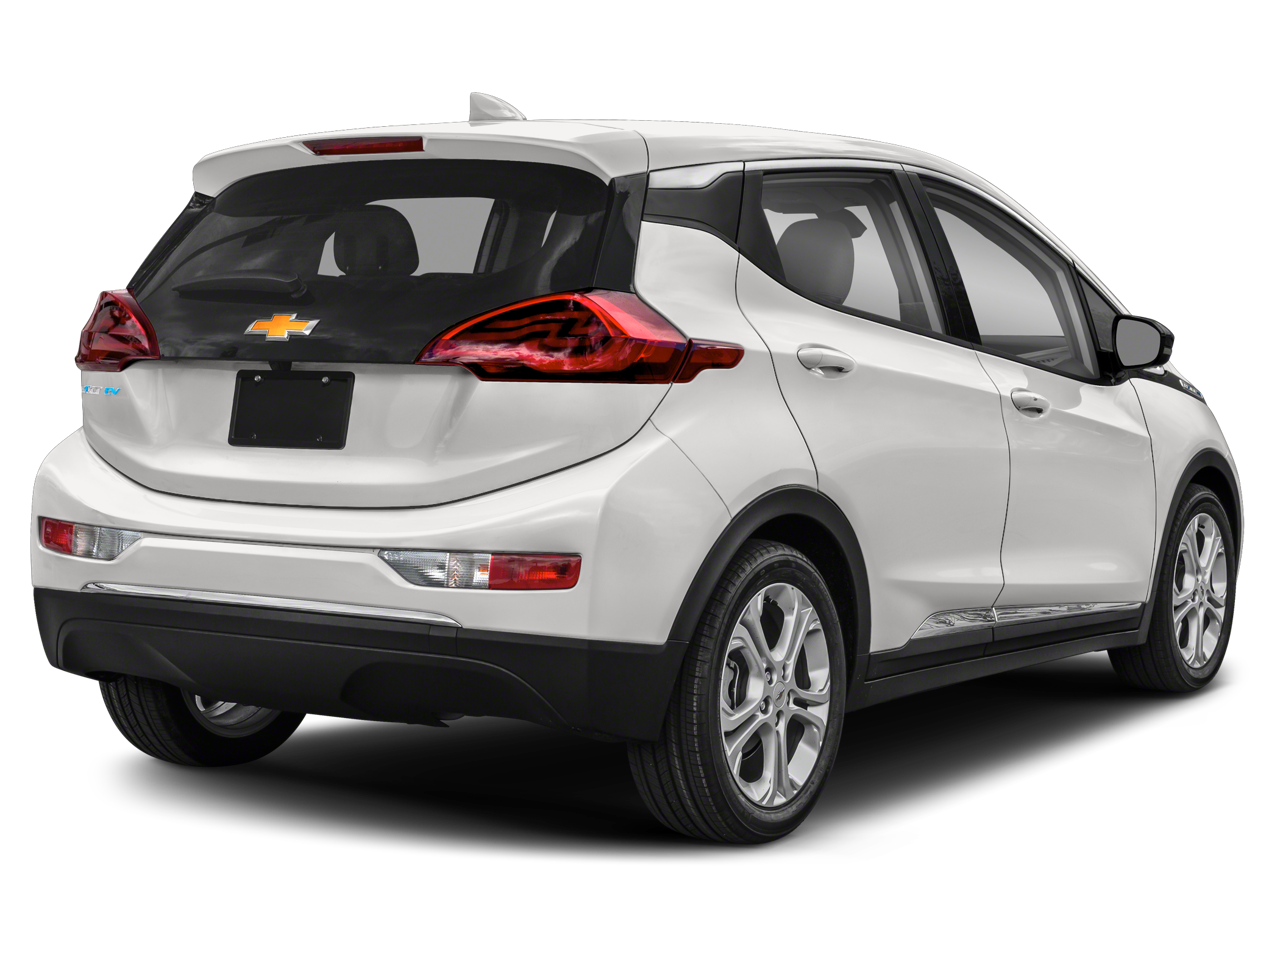 Used 2020 Chevrolet Bolt EV LT with VIN 1G1FY6S00L4141014 for sale in Watsonville, CA